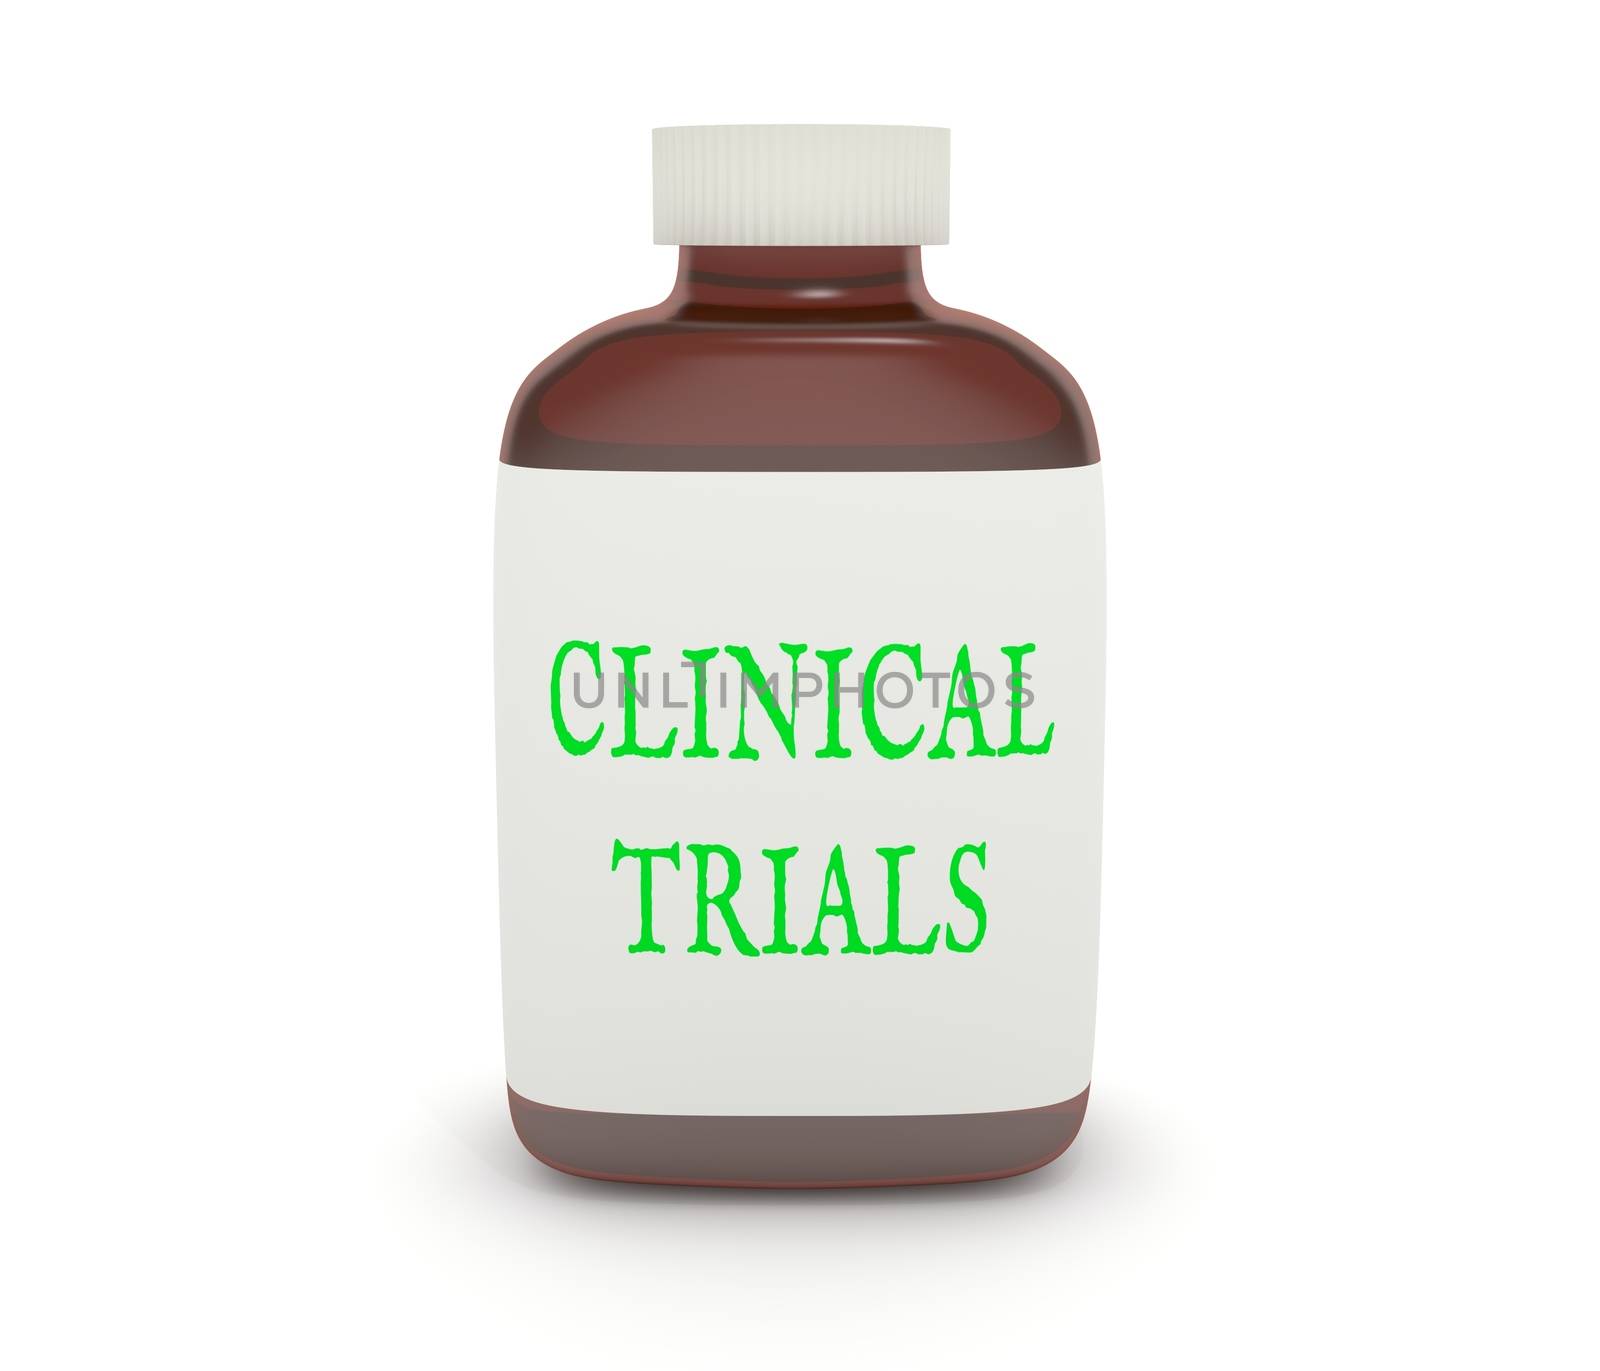 Illustration of a medicine bottle with the words "Clinical Trials" on the label